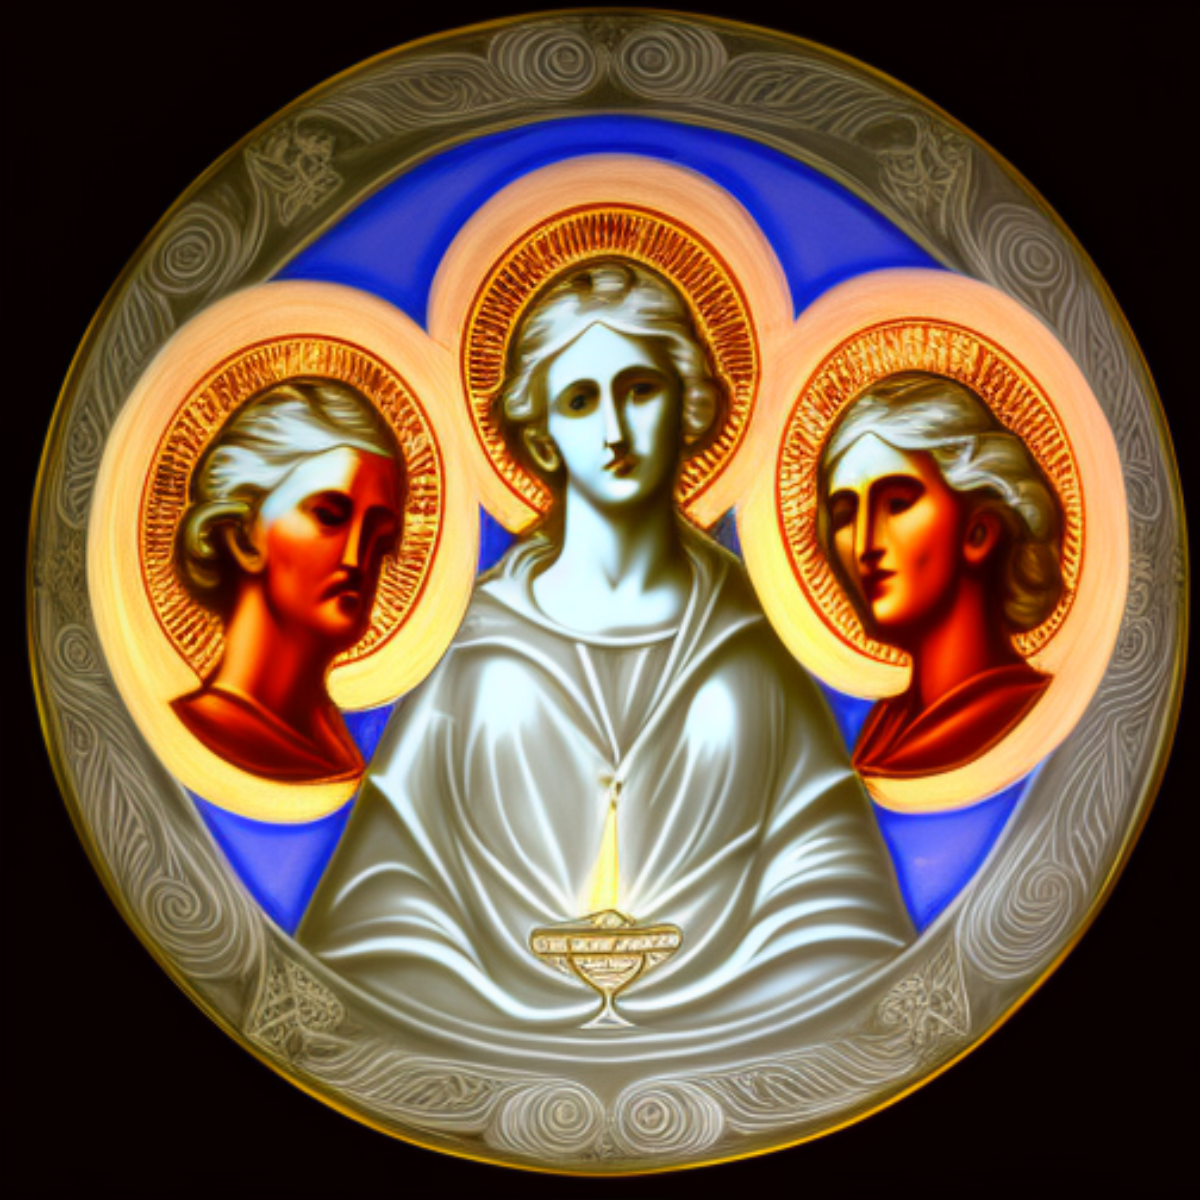 The Saint Initiations Levels 1-3 – Intercession & Blessings from the Saints